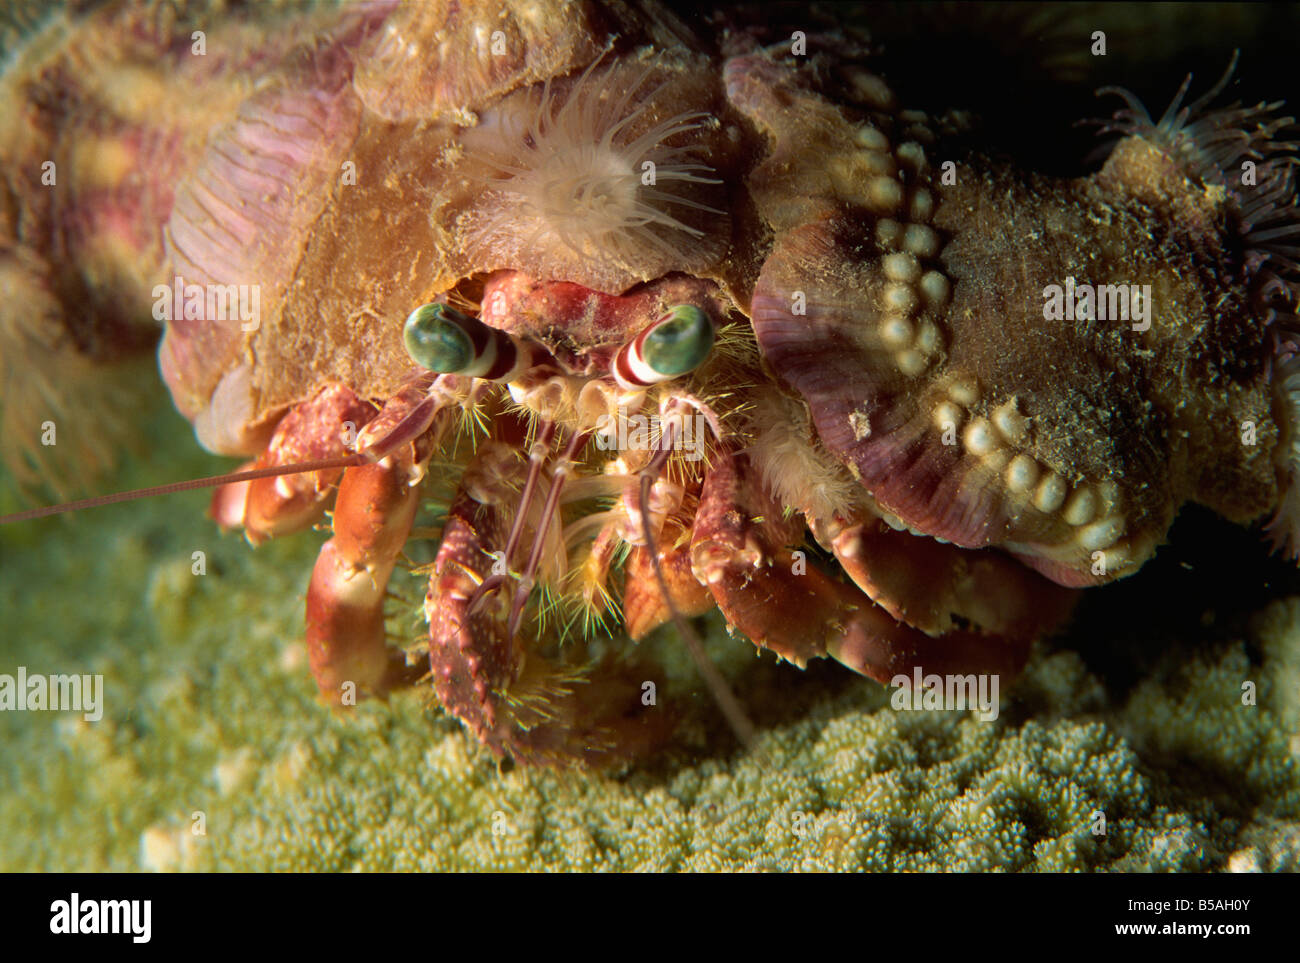 Decorator Crab on Coral Reef in Indonesia Stock Photo - Image of  biodiversity, national: 149316128